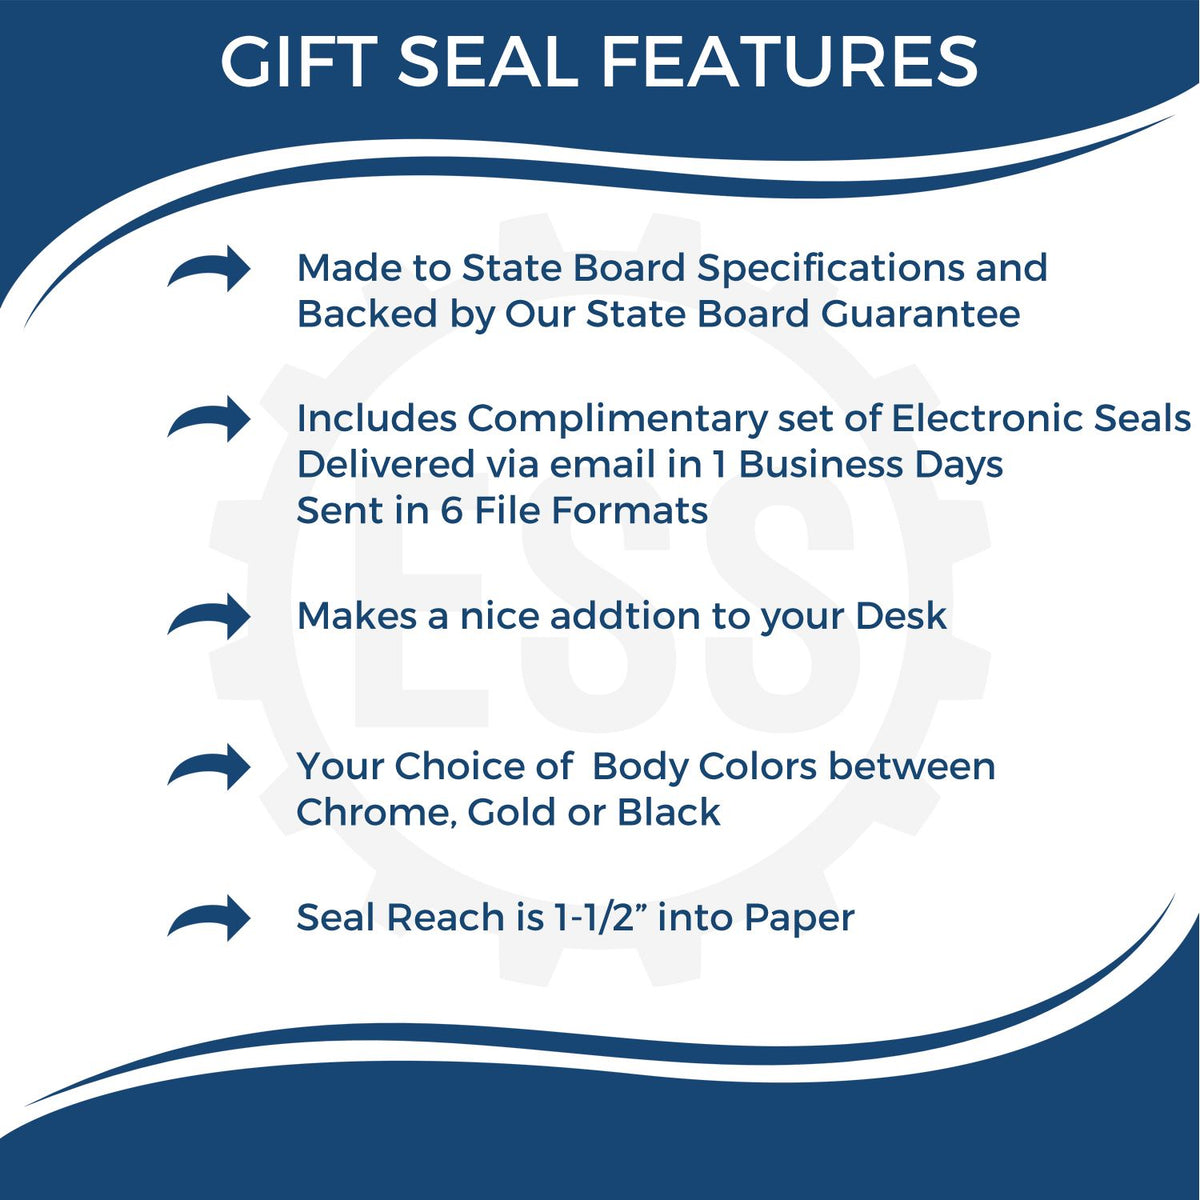 A picture of an infographic highlighting the selling points for the Gift Vermont Geologist Seal